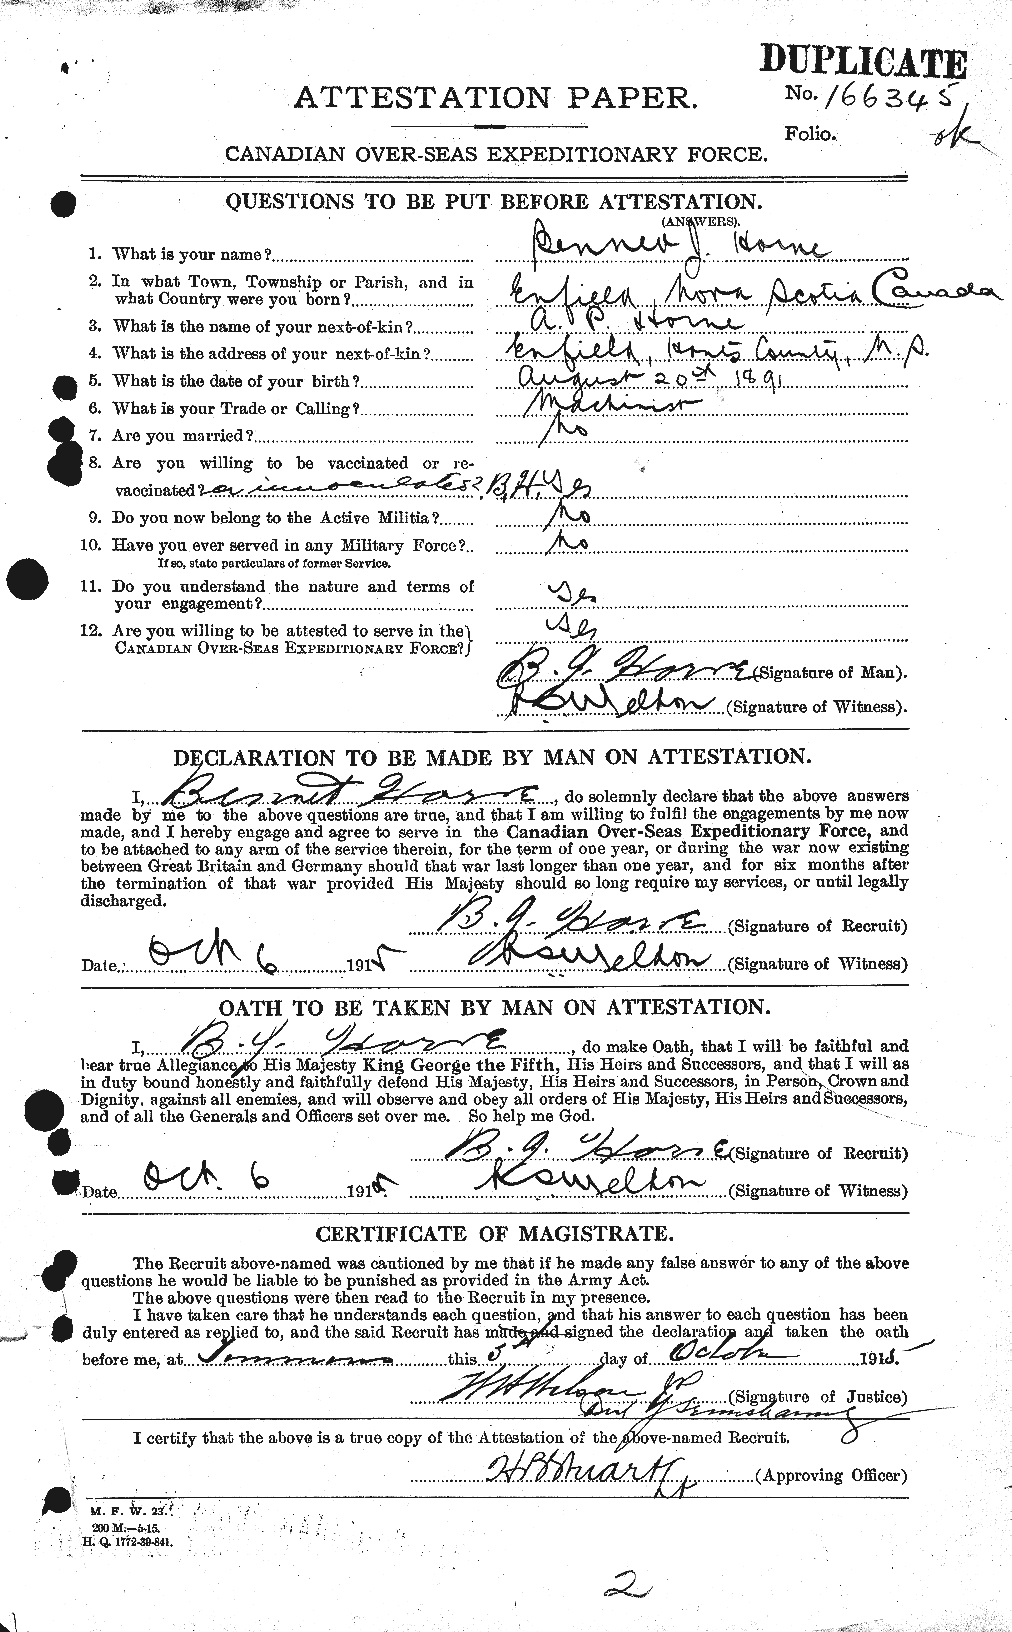 Personnel Records of the First World War - CEF 399574a